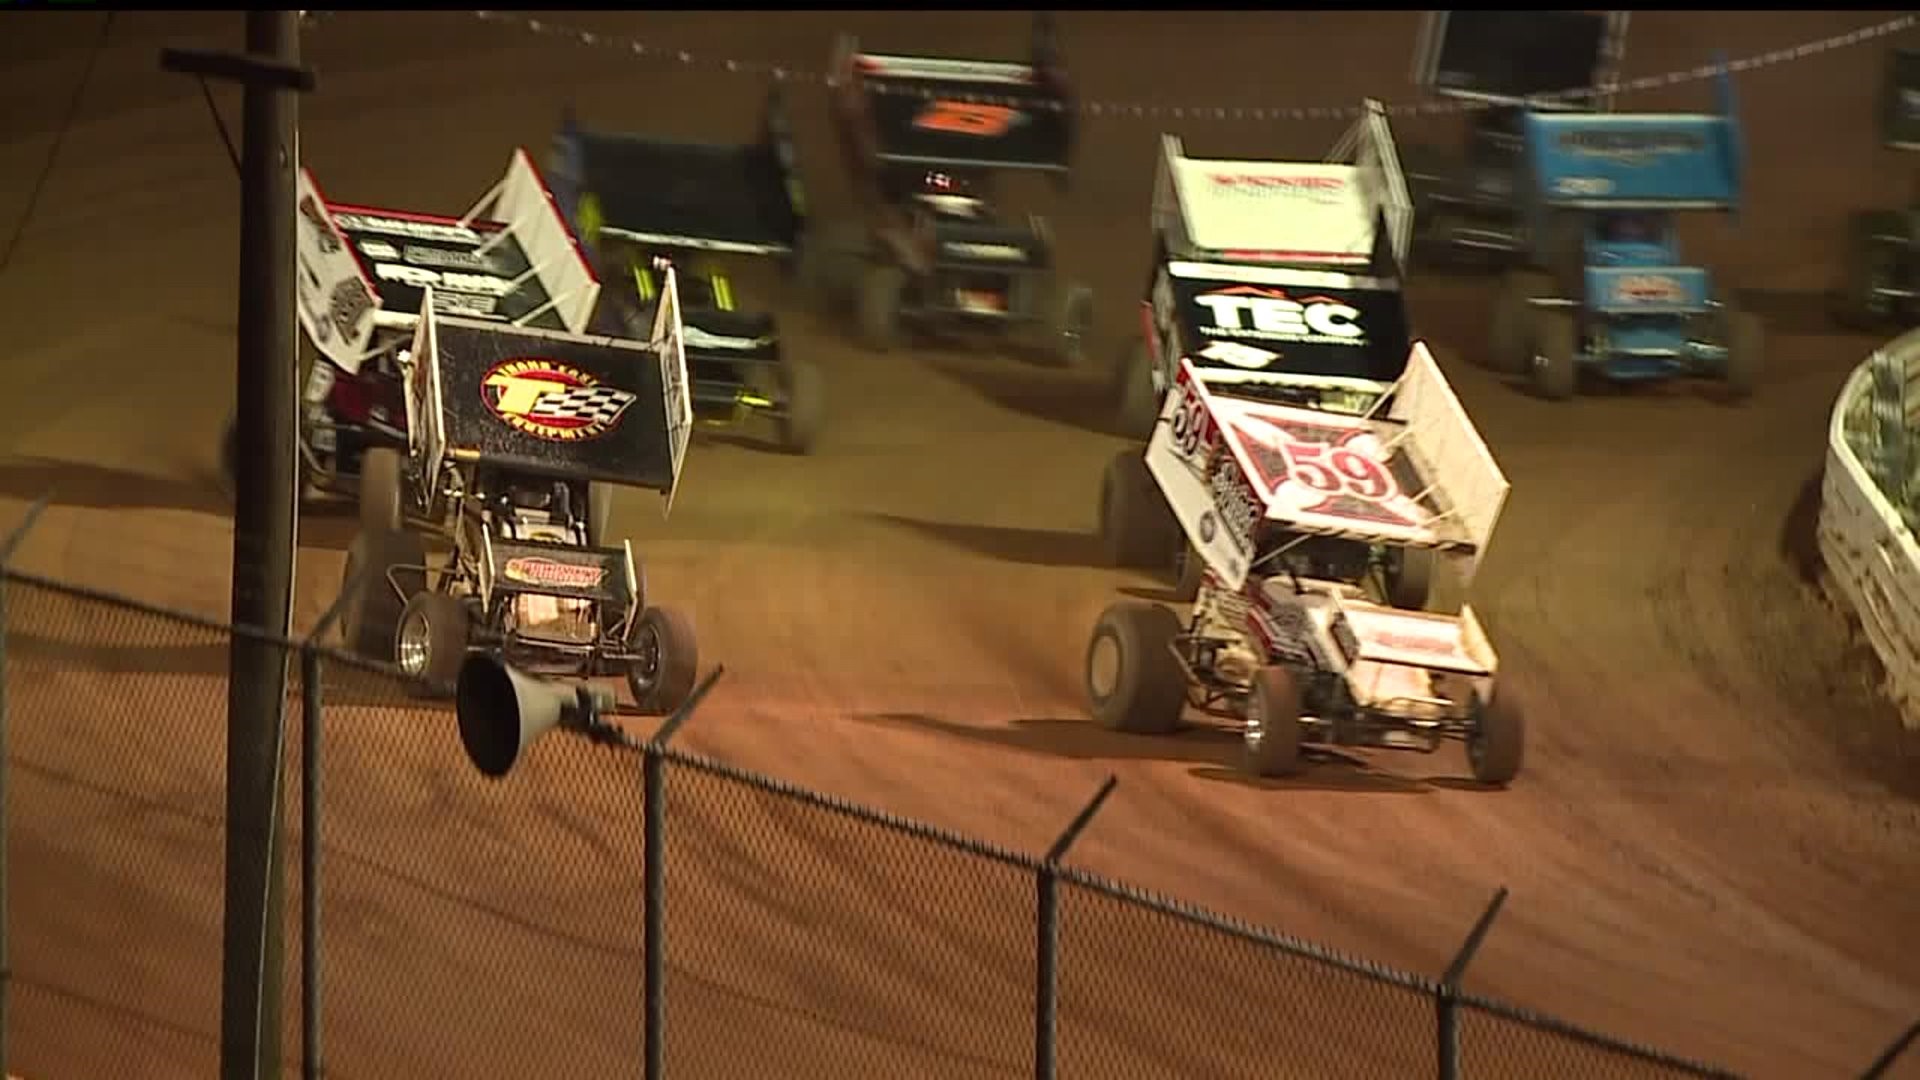 Sports Spotlight: Gettysburg Clash - PA Posse takes on the World of Outlaws